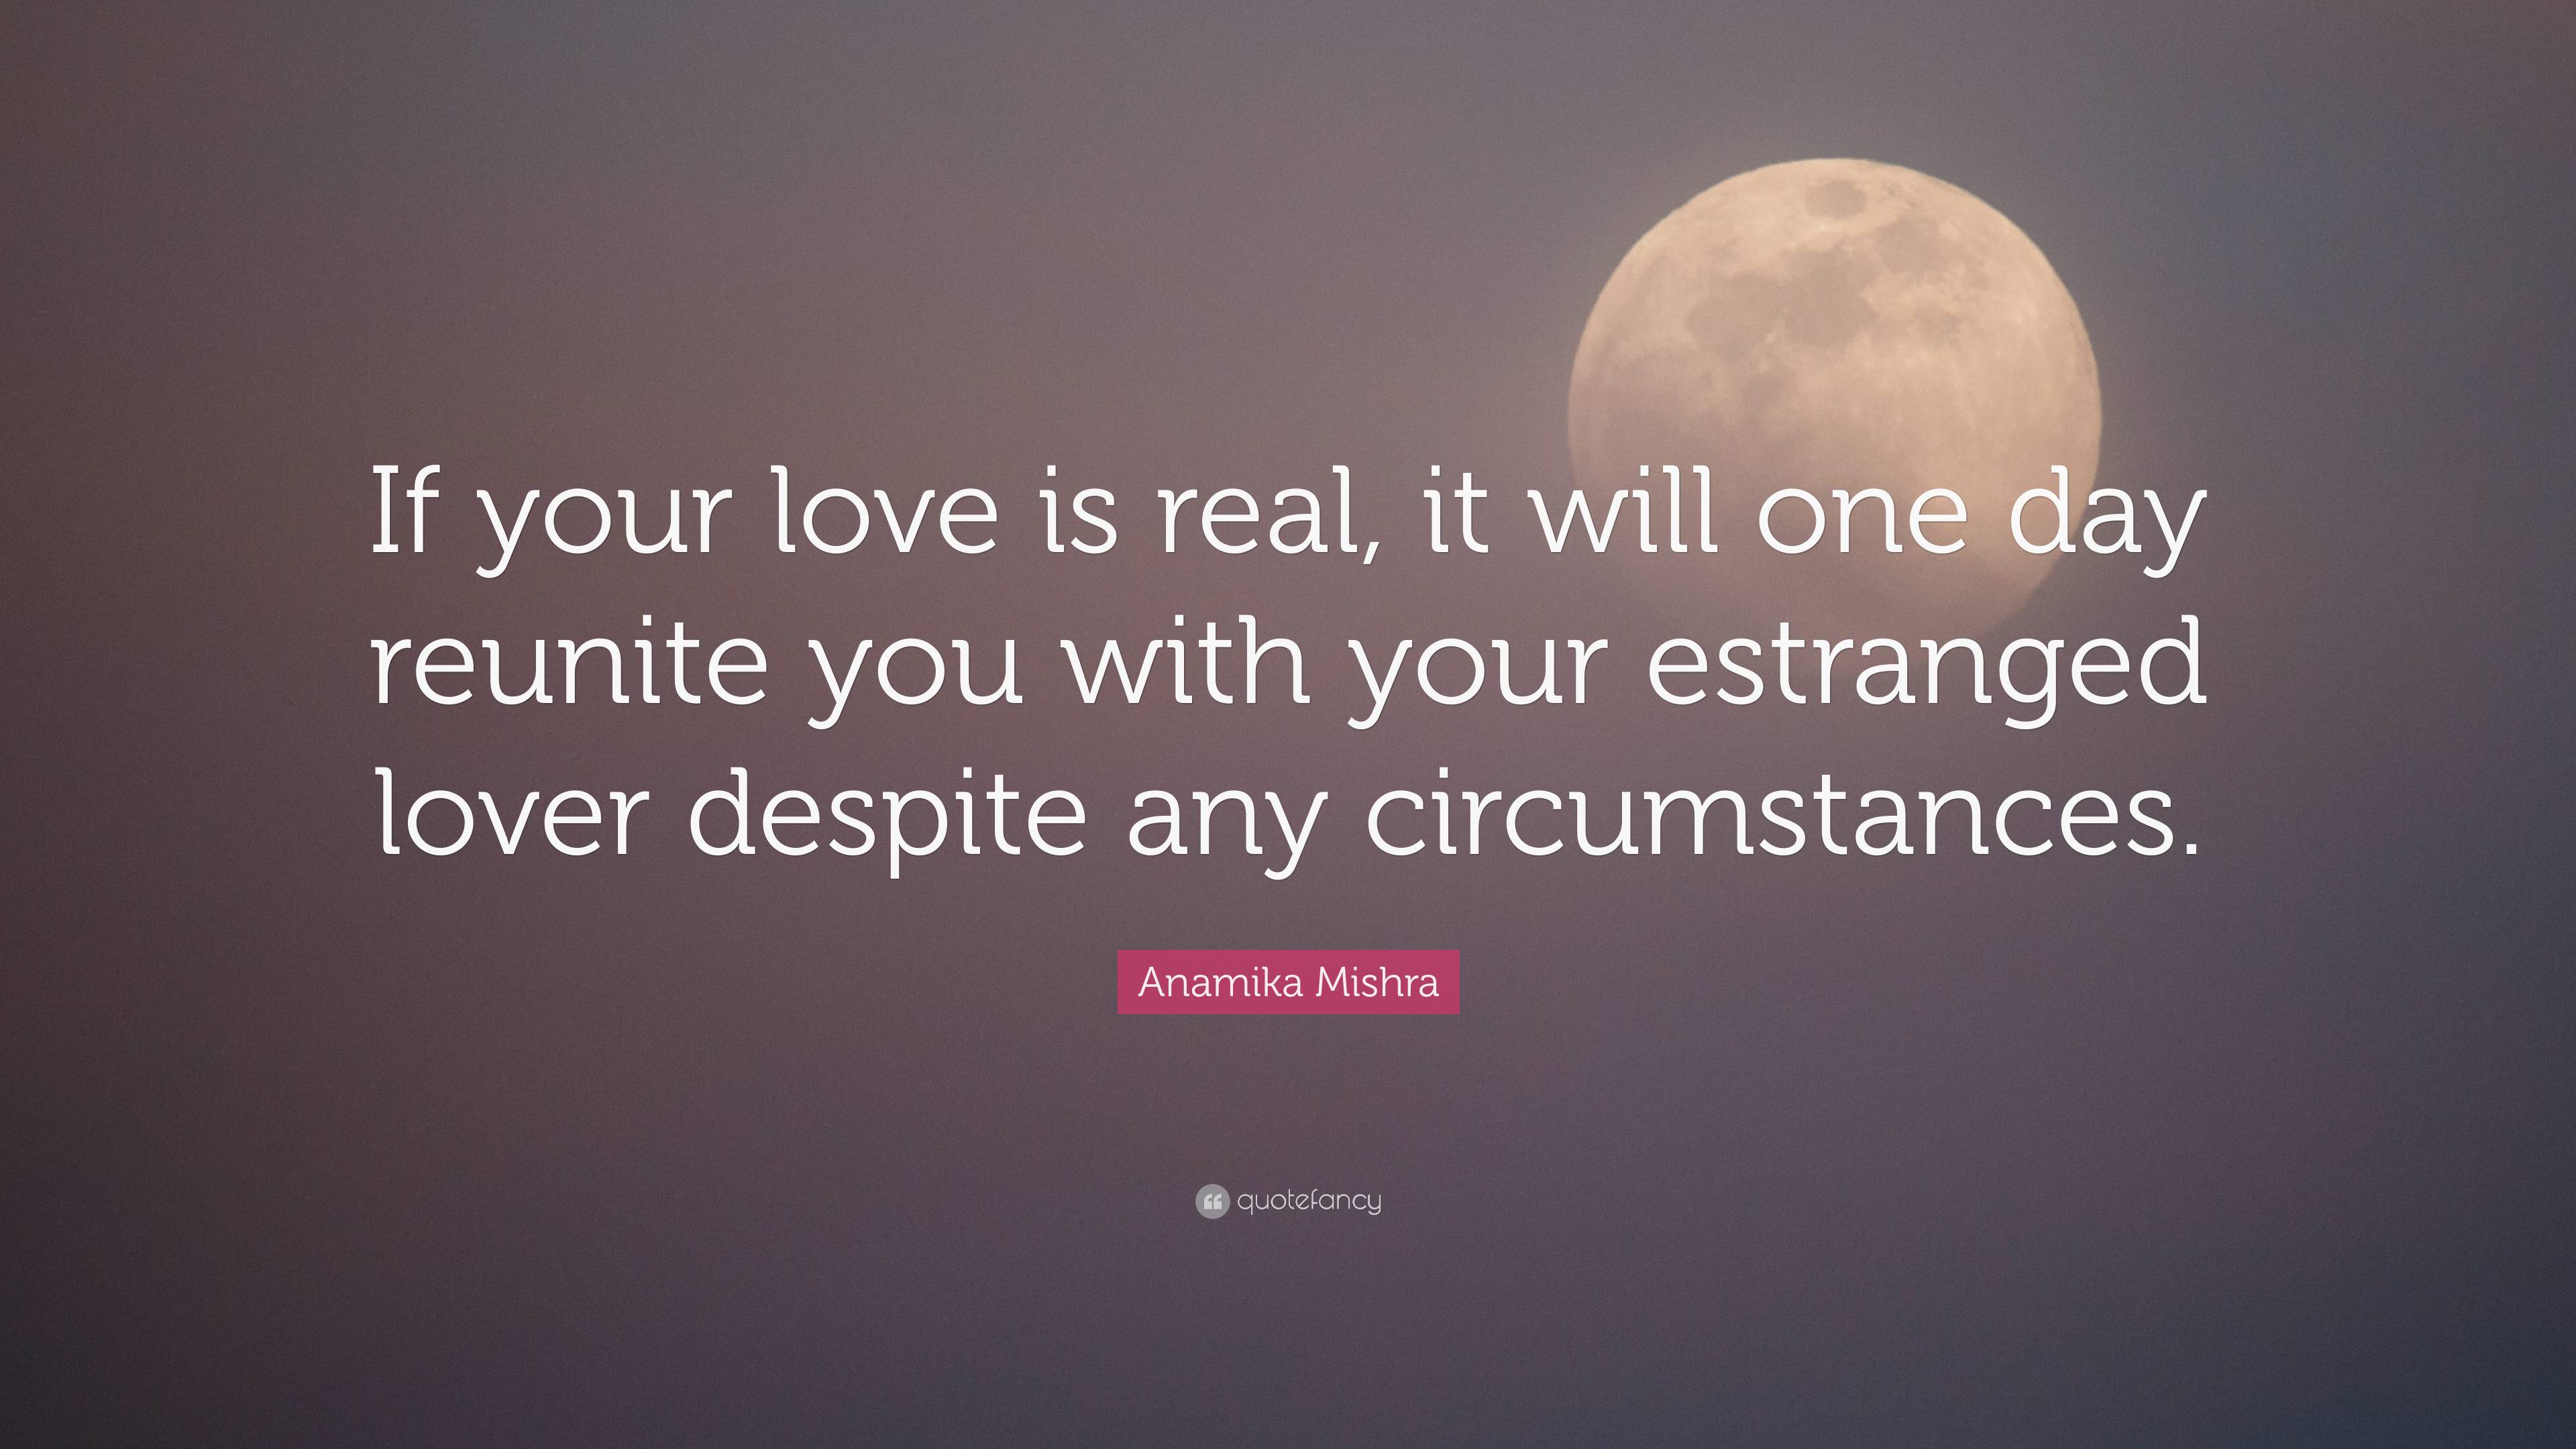 Anamika Mishra Quote: “If your love is real, it will one day